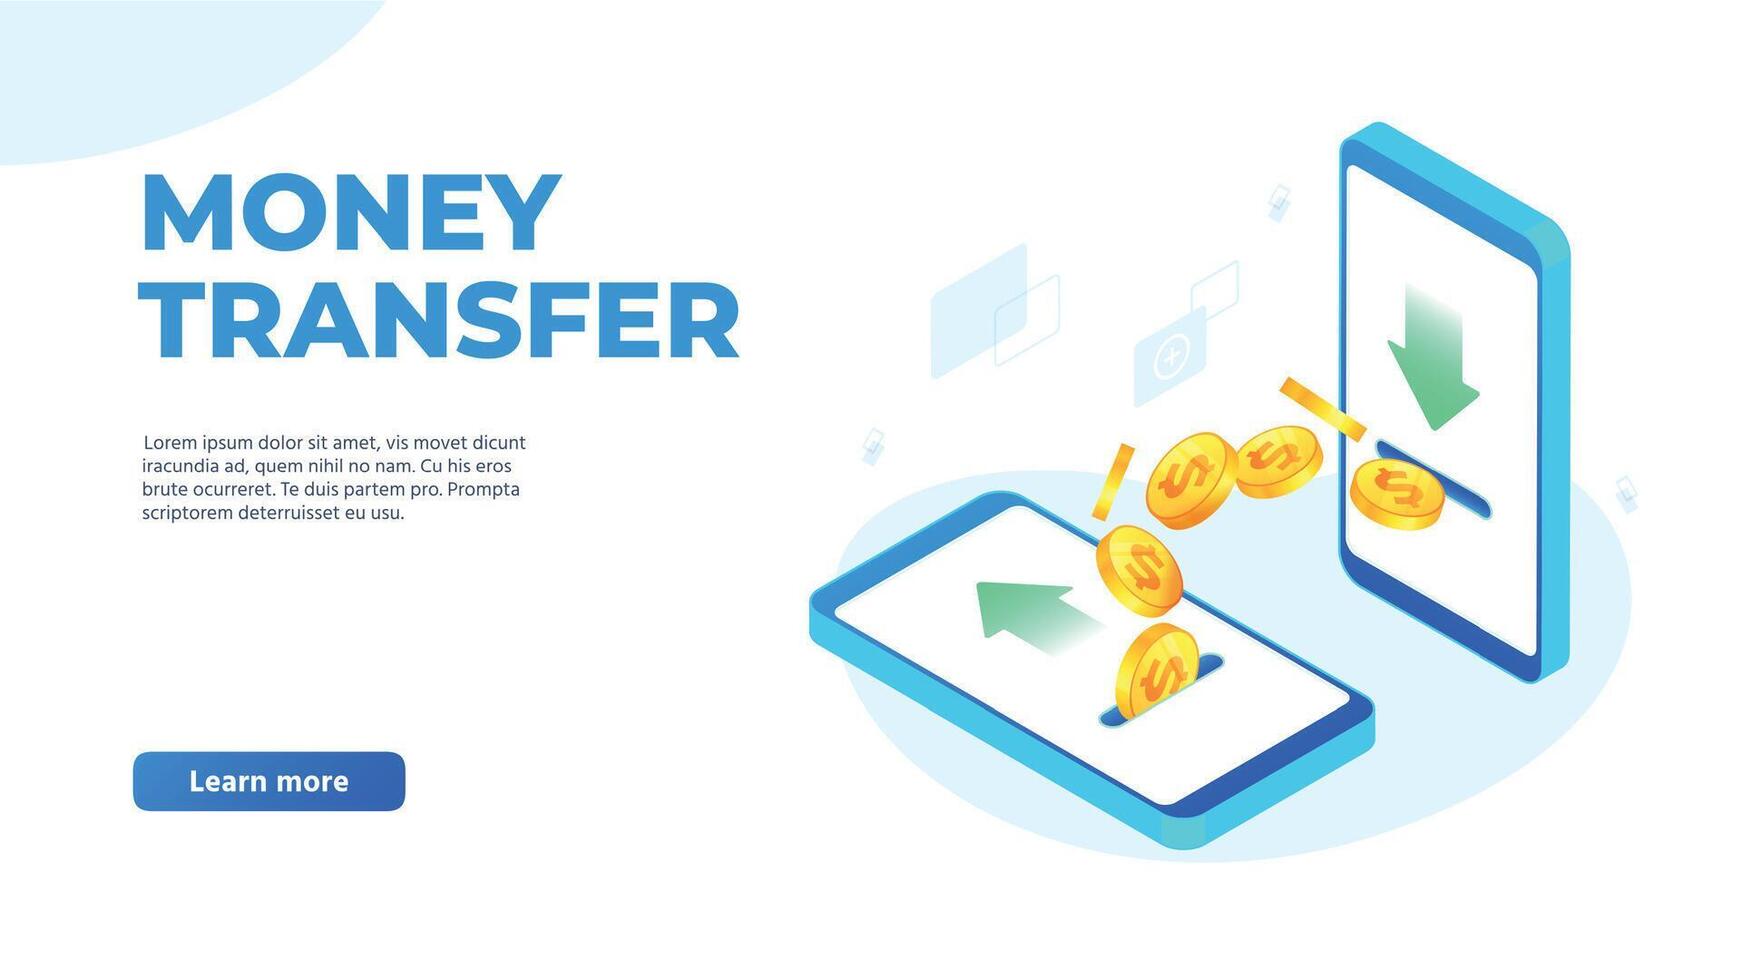 Money transfer on mobile phones. Dollar coins flying from one smartphone to other. Sending and receiving money vector